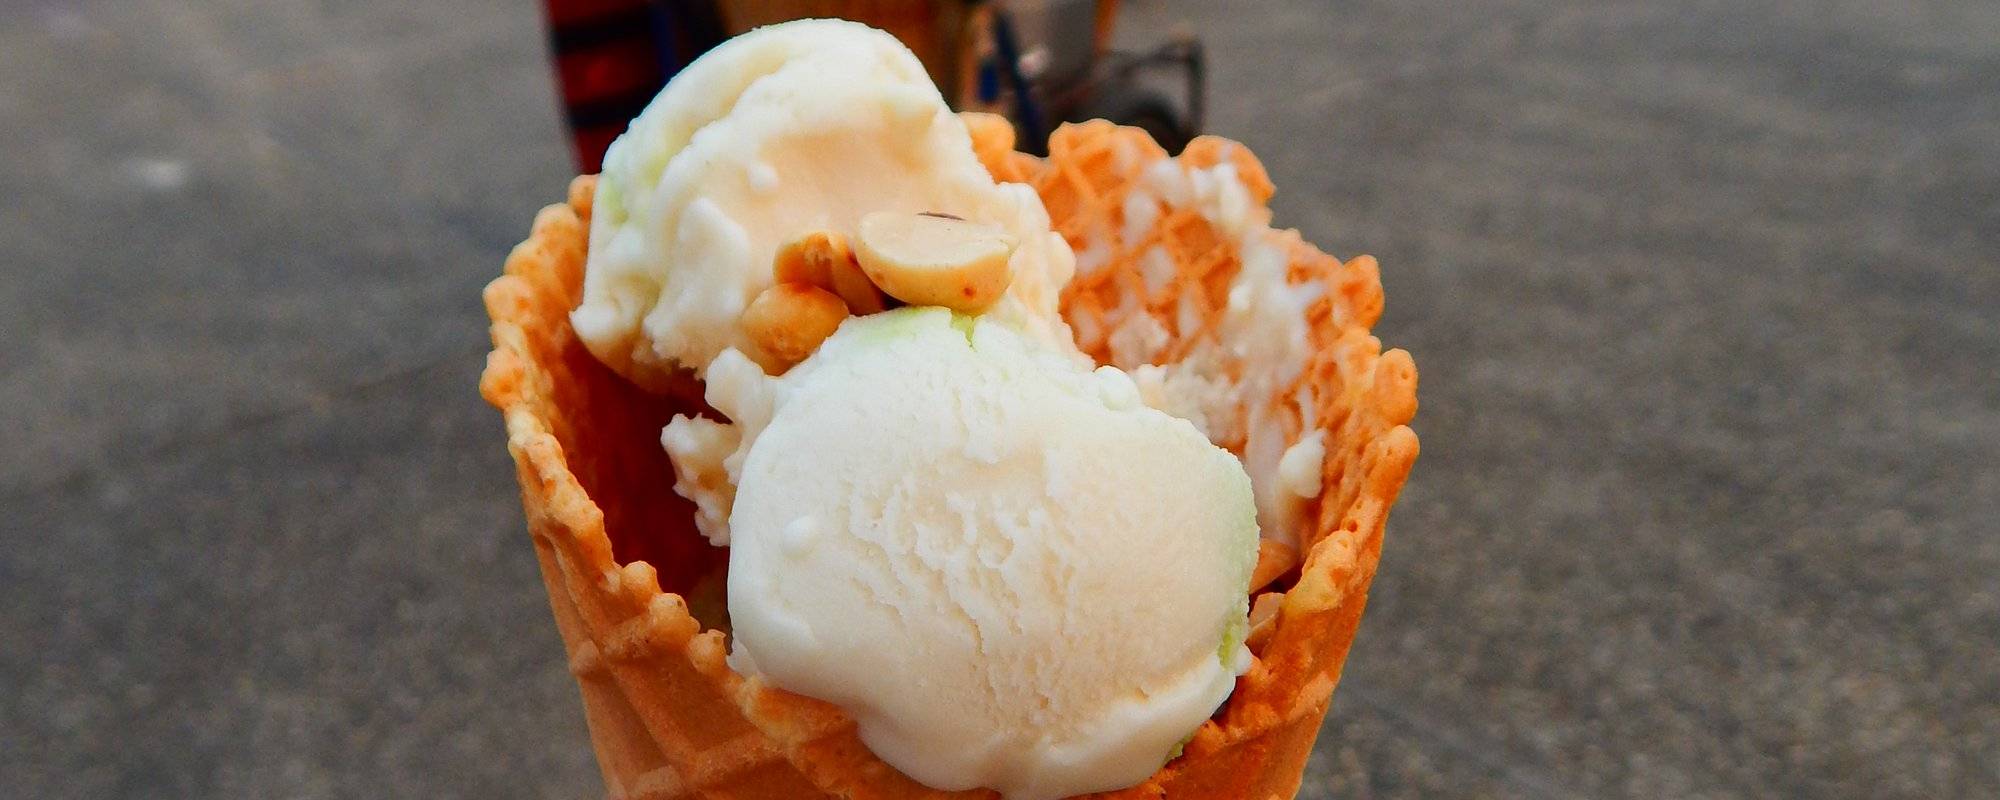 When In Thailand: The Best Tasting Coconut Ice Cream. Chiang Mai, Thailand